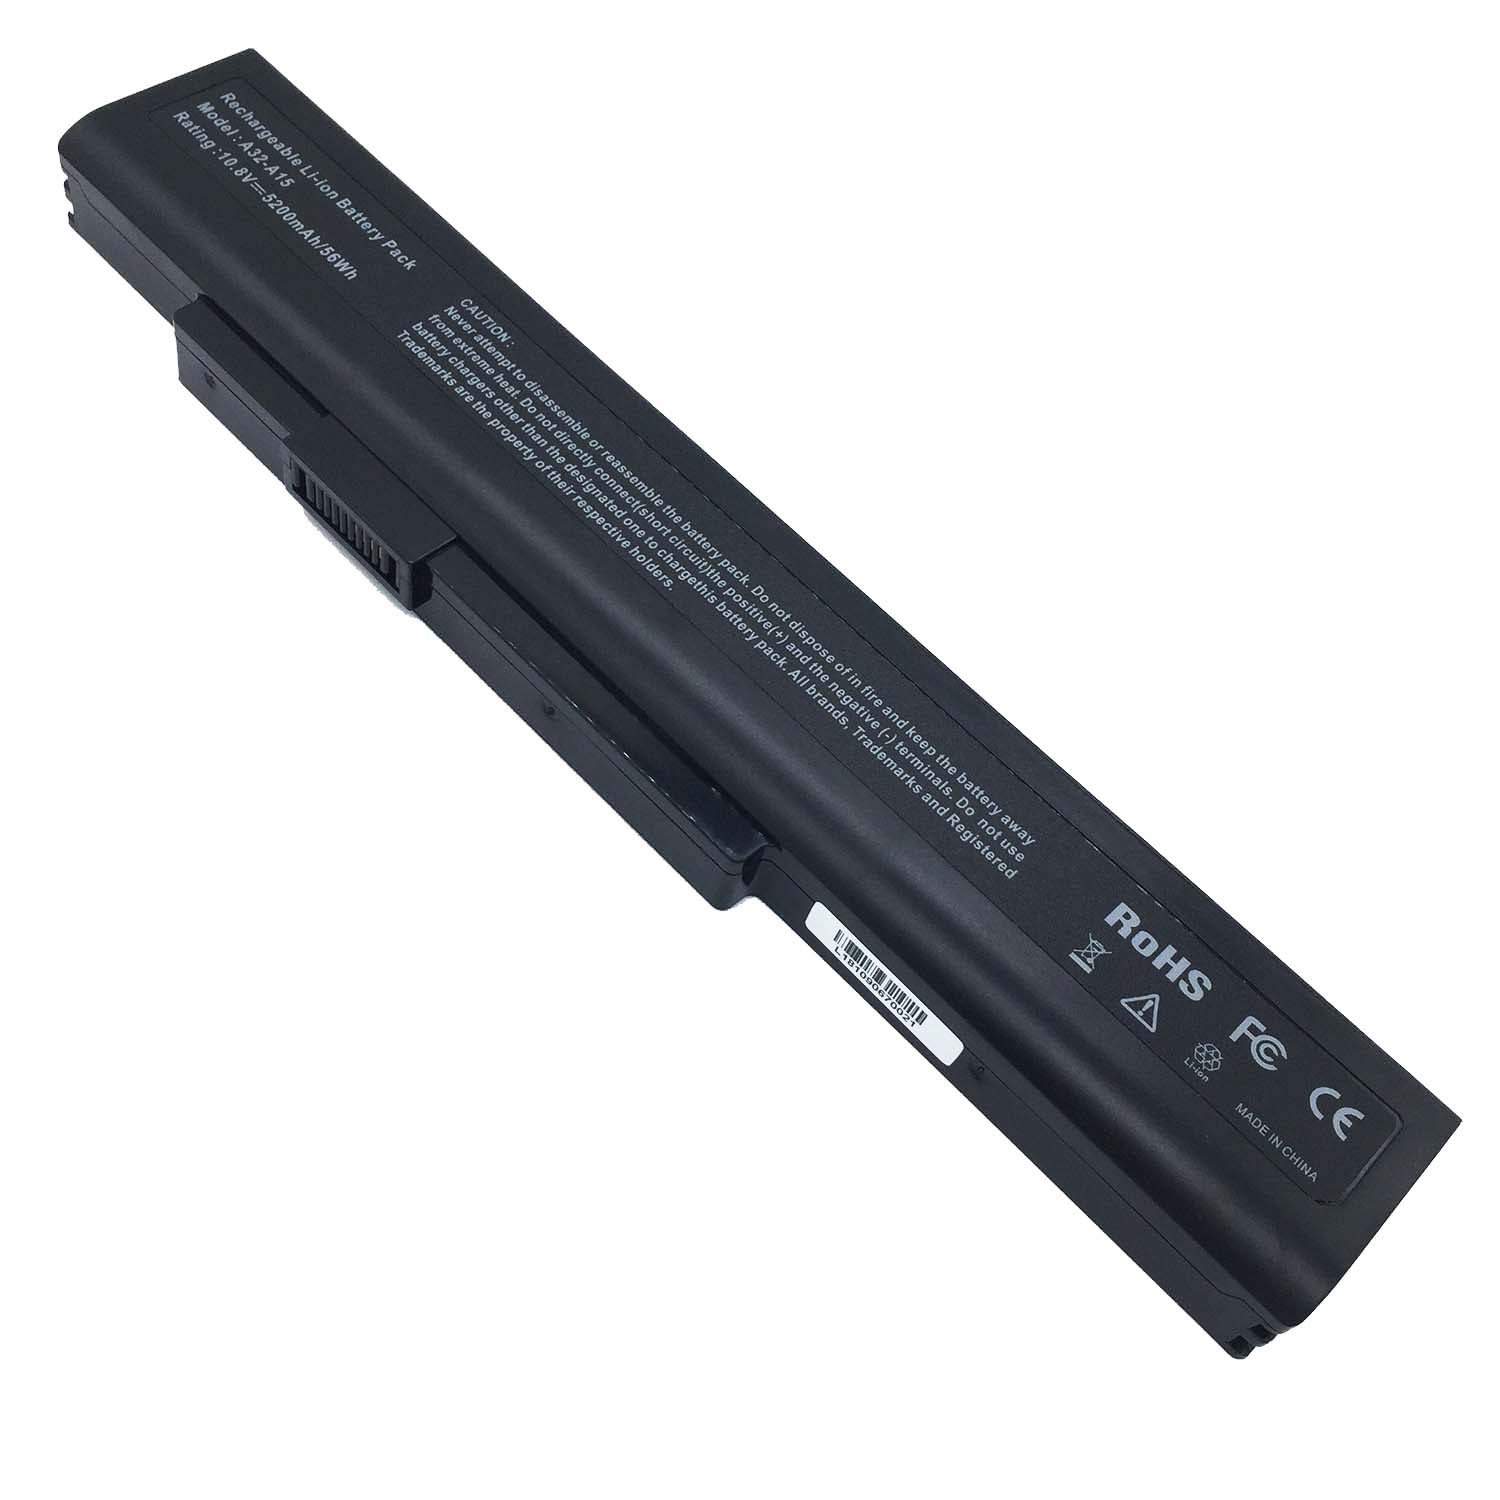 Replacement Battery for Medion Medion Akoya P6640 battery